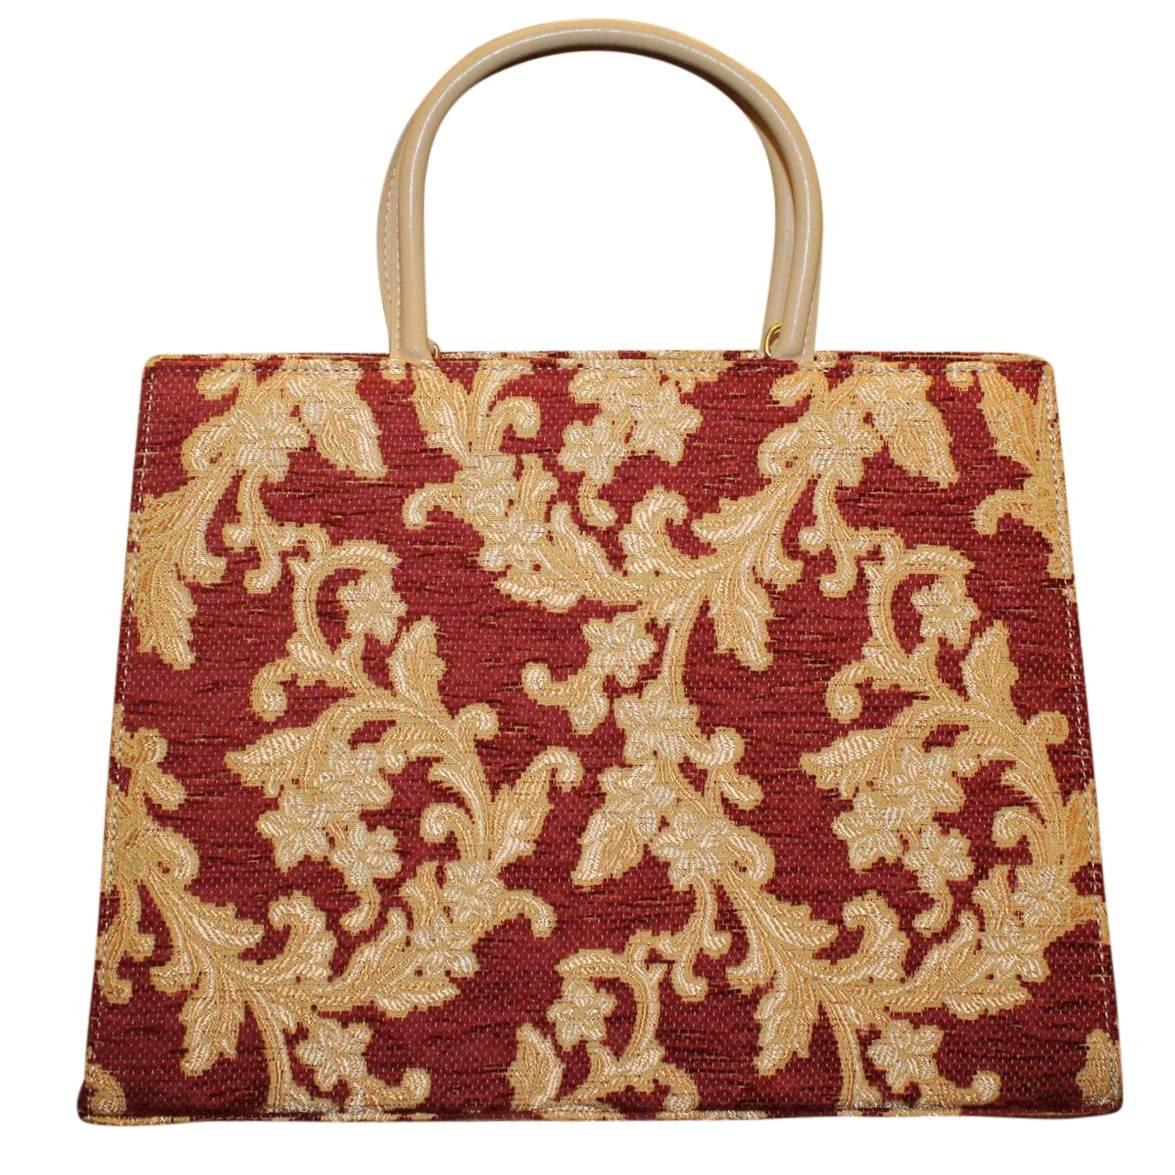 Stunning Carlo Zini Milano jewel bag
One of the world's best bijoux designers
Unique piece !
Red textile
Yellow/ochre embroidery
Wonderful golden metal, crystals and swarovsky applications
Floral pattern
Beige leather handles
Internal zip pocket
Can